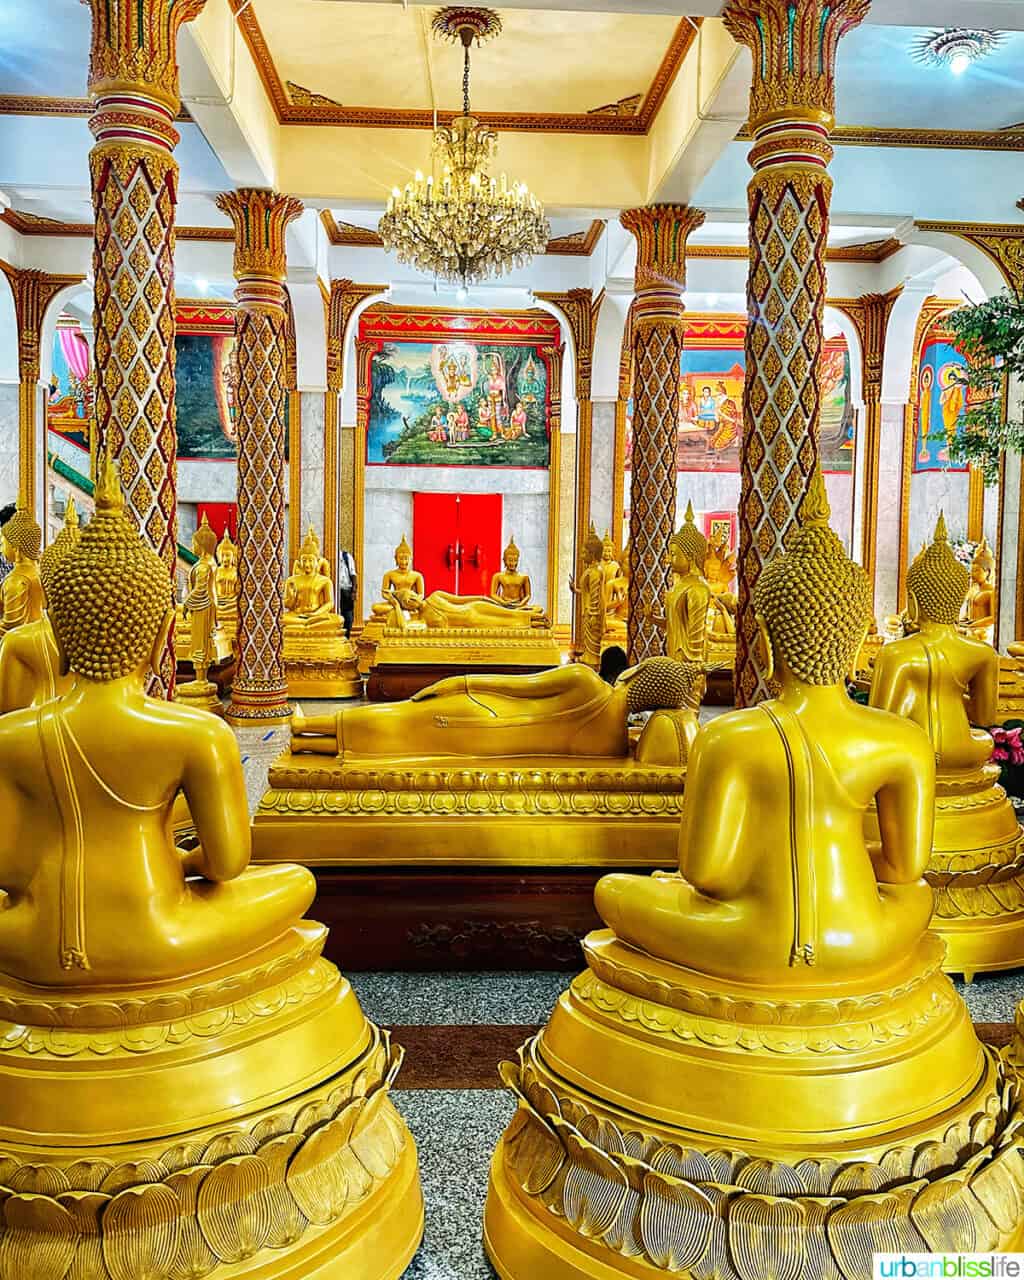 golden buddhas in the Prayer Hall of Wat Chalong Temple in Phuket Thailand.